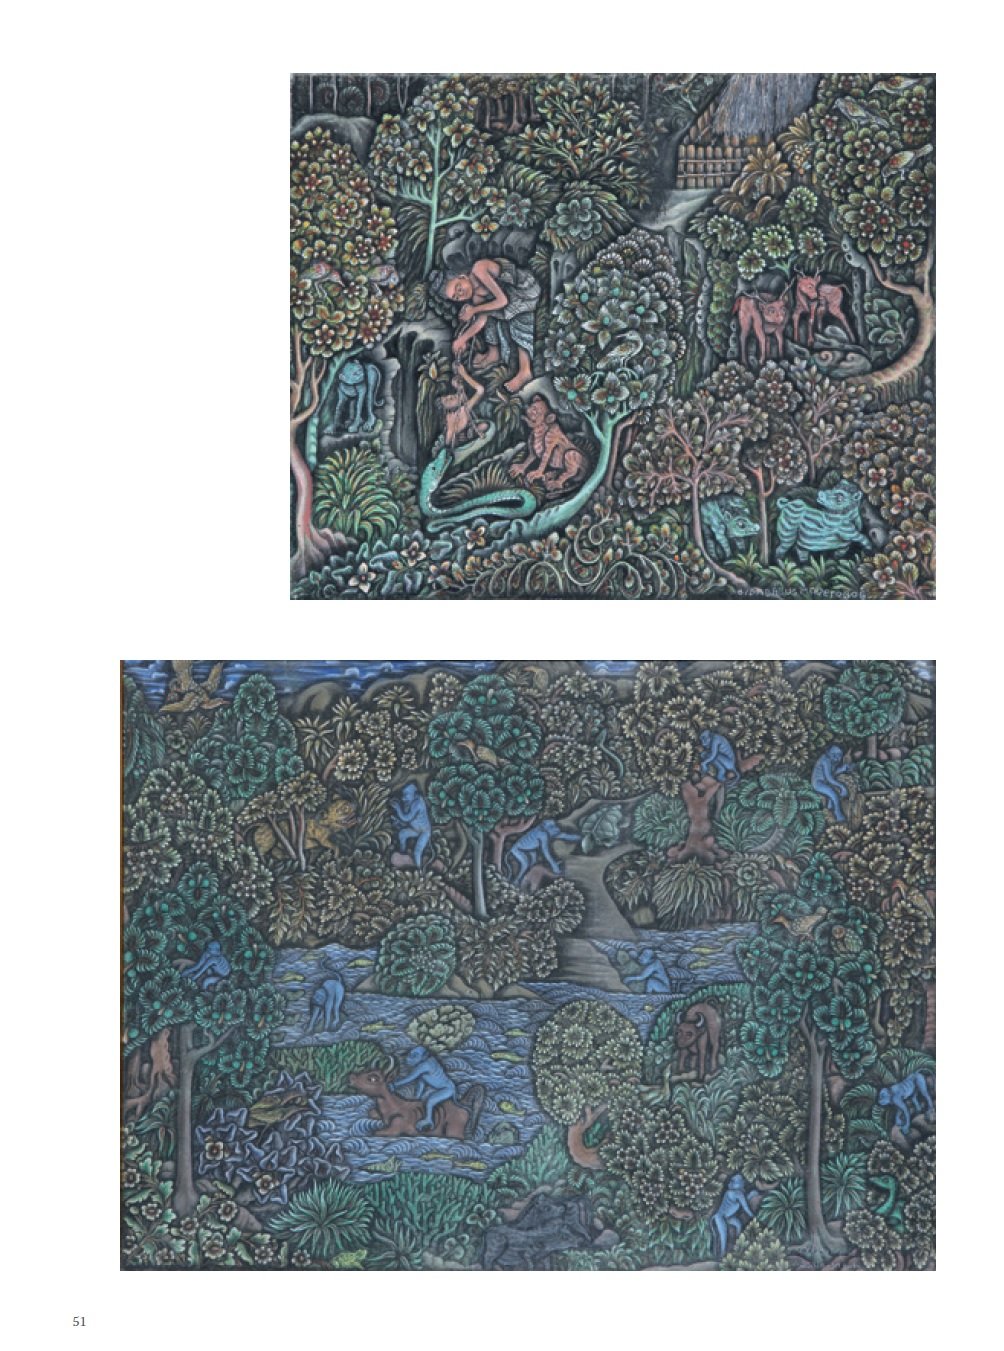 Balinese Painting and Sculpture: From the Krzysztof Musial Collection